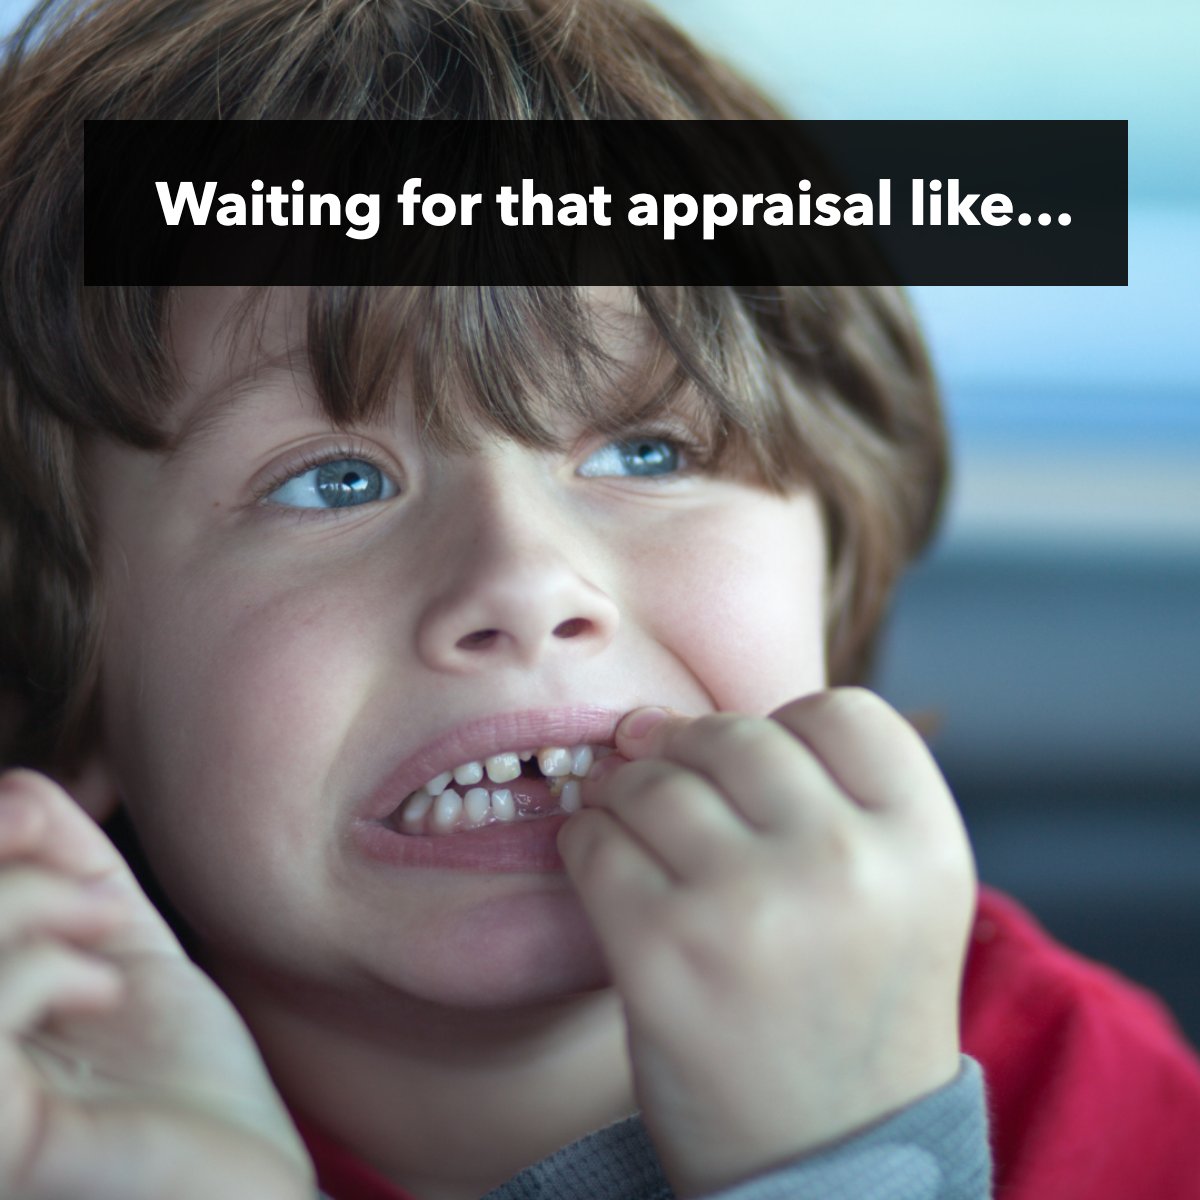 Are you familiar with that feeling? 😧 Like, how long can it take? ⏱ #appraisals #appraisaltime #realestate #realestatefact #actualinstagramhomes #firsttimebuyer #actualhomesofinstagram #newbuildhouse #interiordesign #nexthome #homedesign #kitchensofinstagram